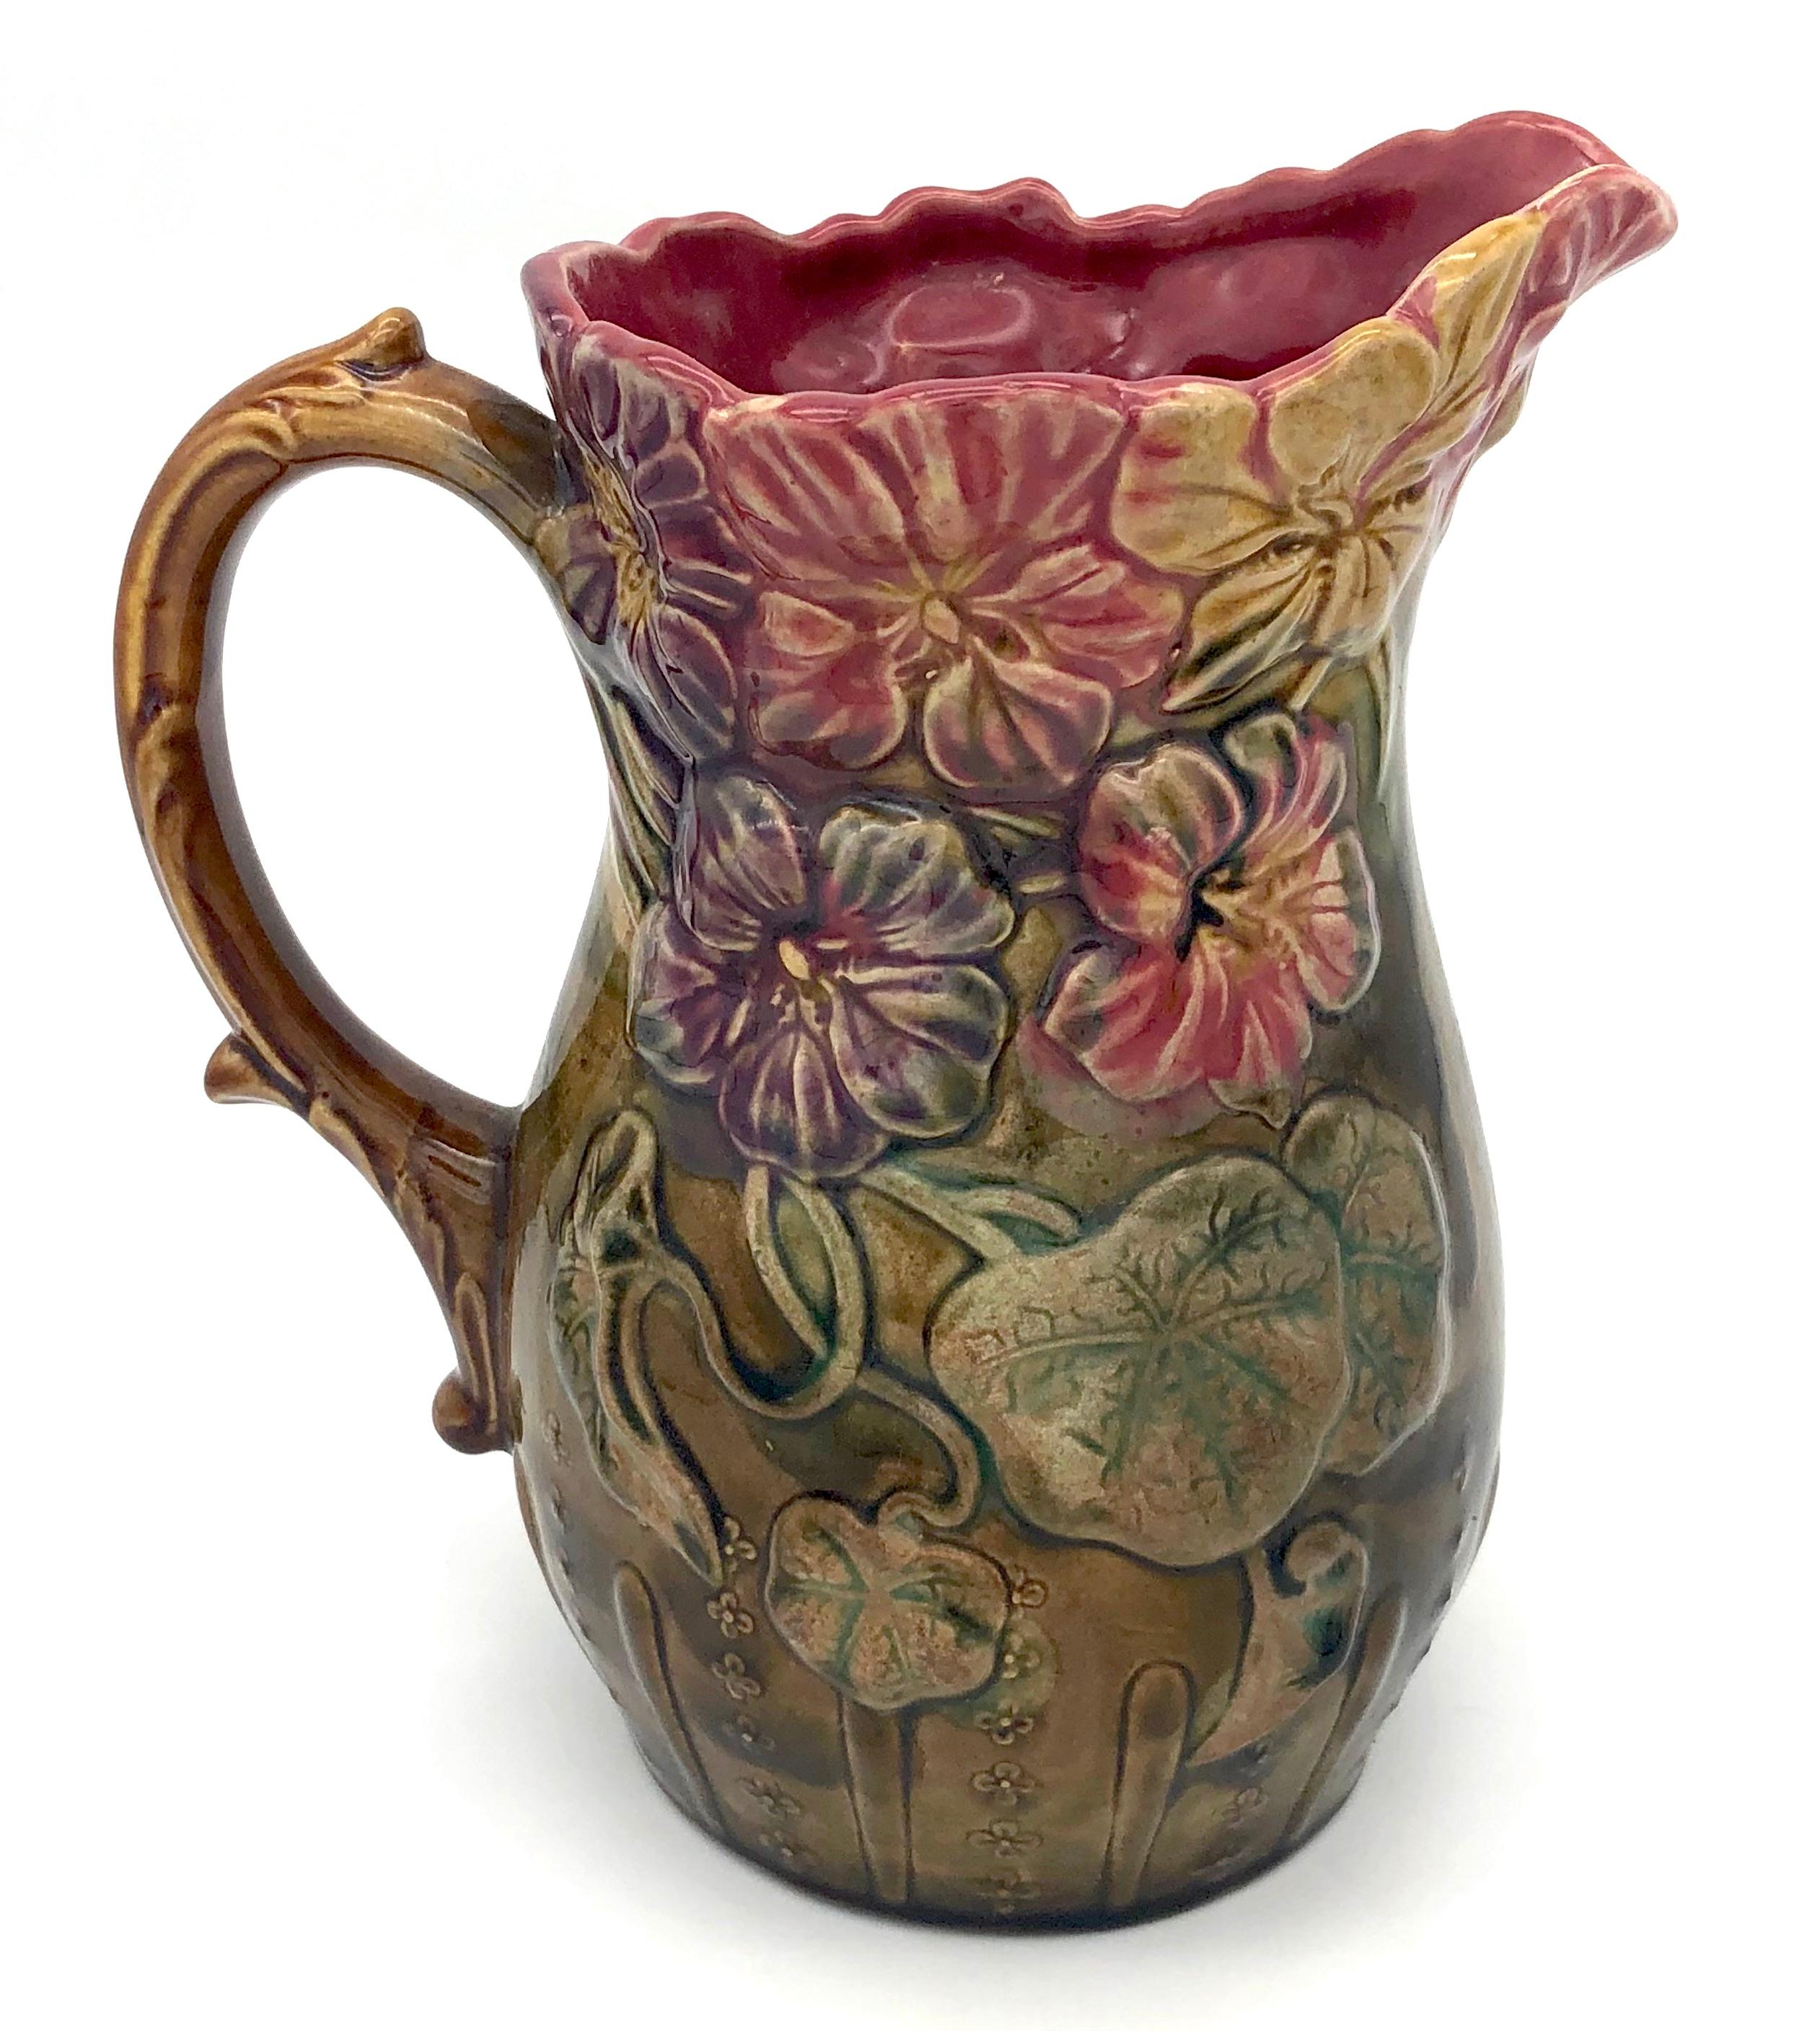 This wonderfully glazed pitcher is decorated with nasturtiums in relief in.
It was hand crafted in France in circa 1895.
The pitcher is marked Frie Onnaing, made in France.